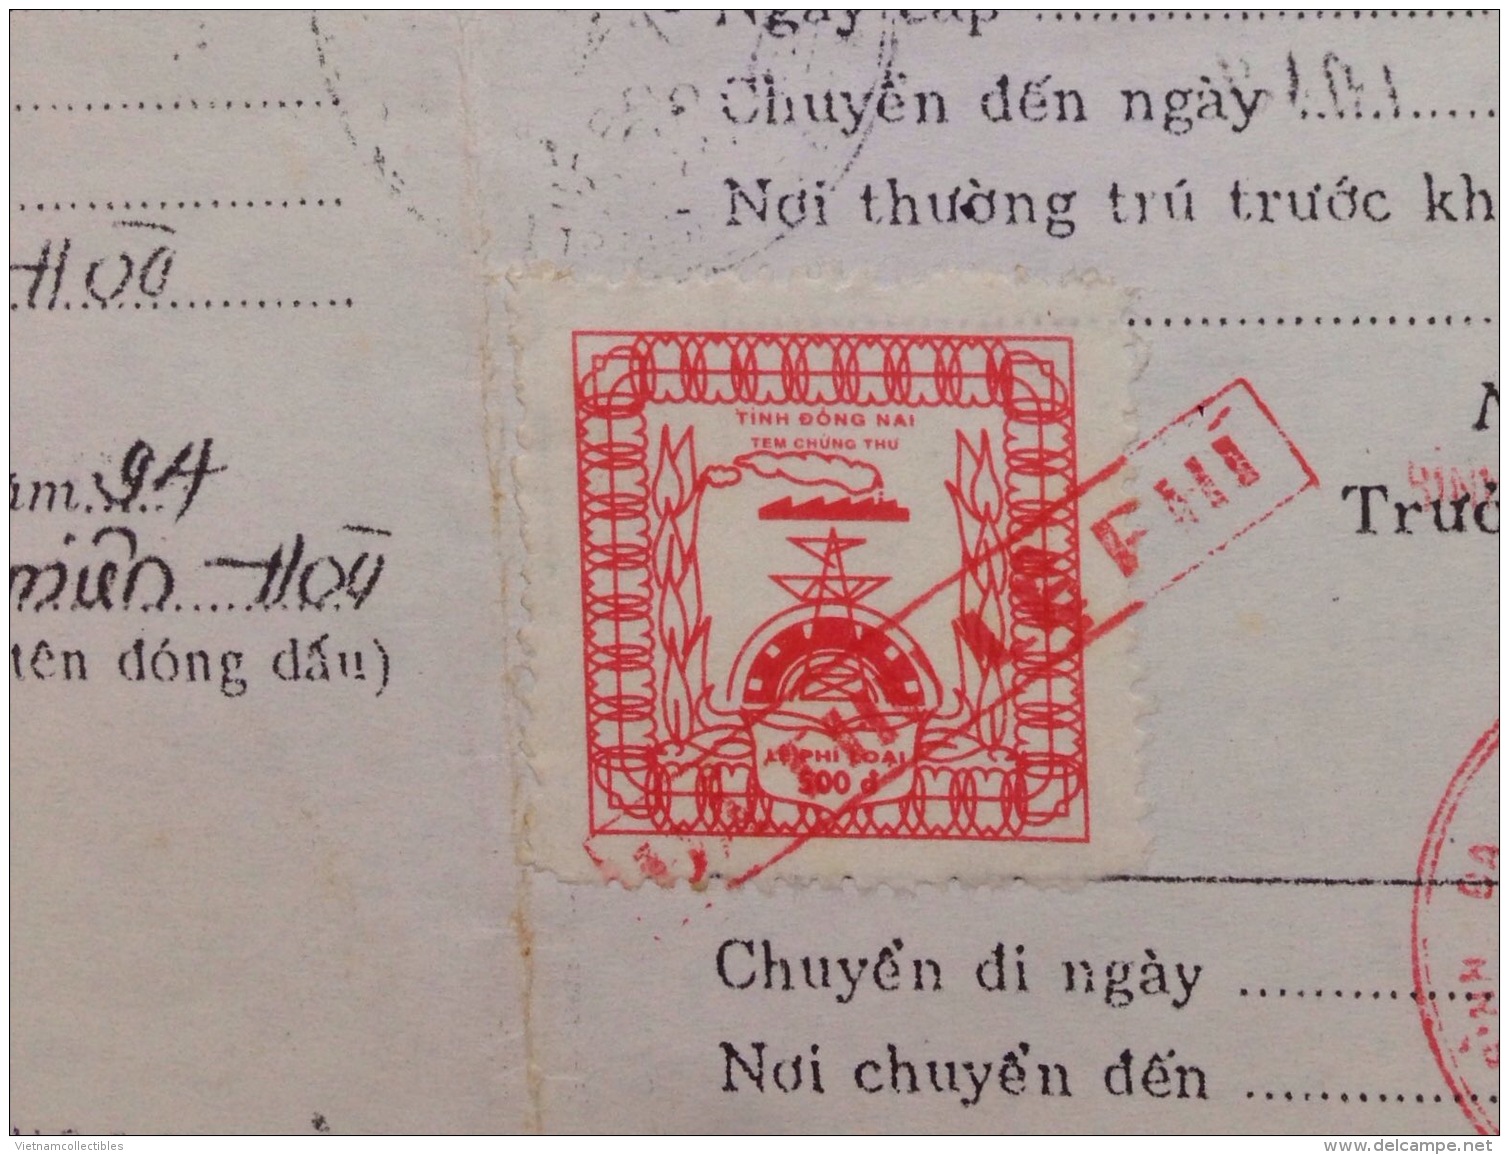 Vietnam Viet Nam Document With 500d (small Number) Dong Nai Revenue Stamp 2000 / 02 Images - Viêt-Nam